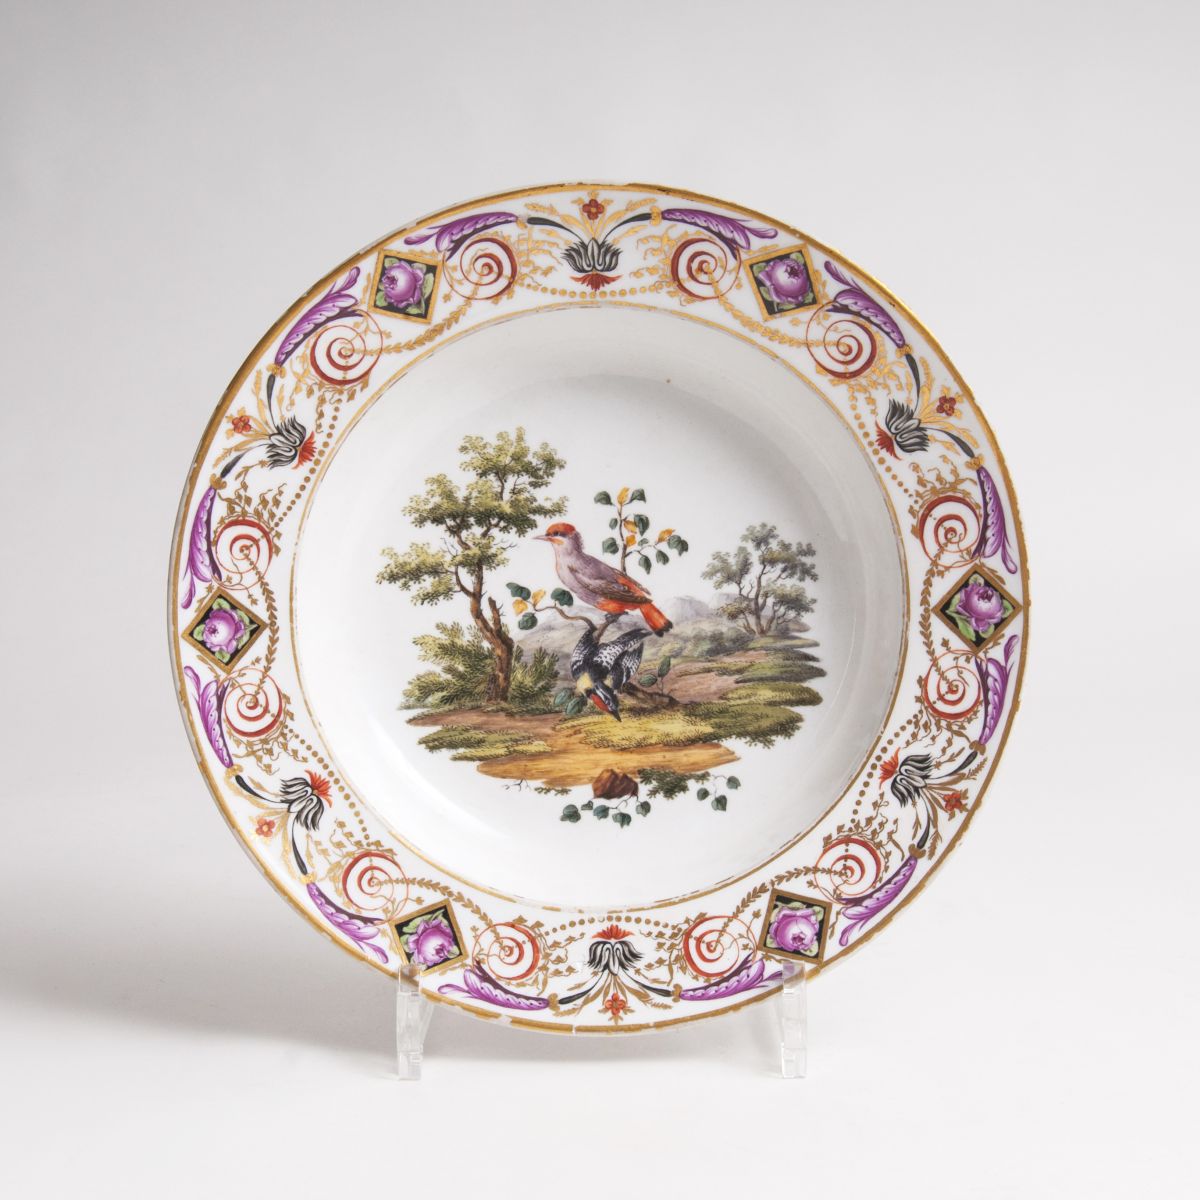 A plate with bird painting and ornamental border